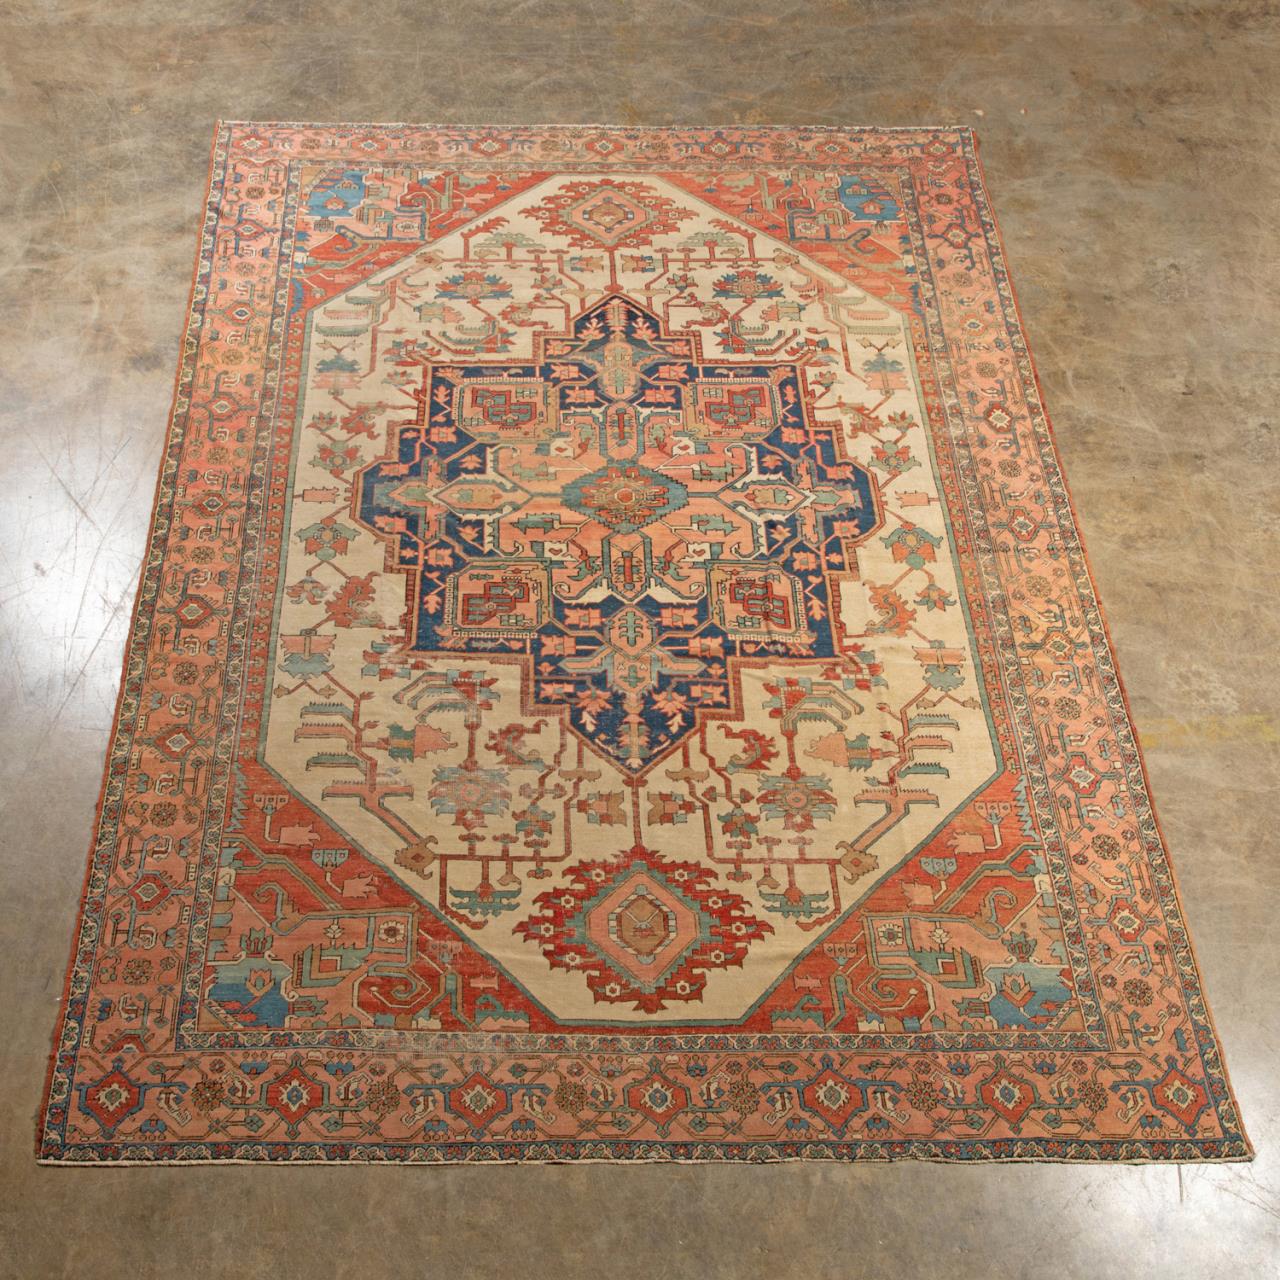 EARLY 20TH C. HAND KNOTTED PERSIAN